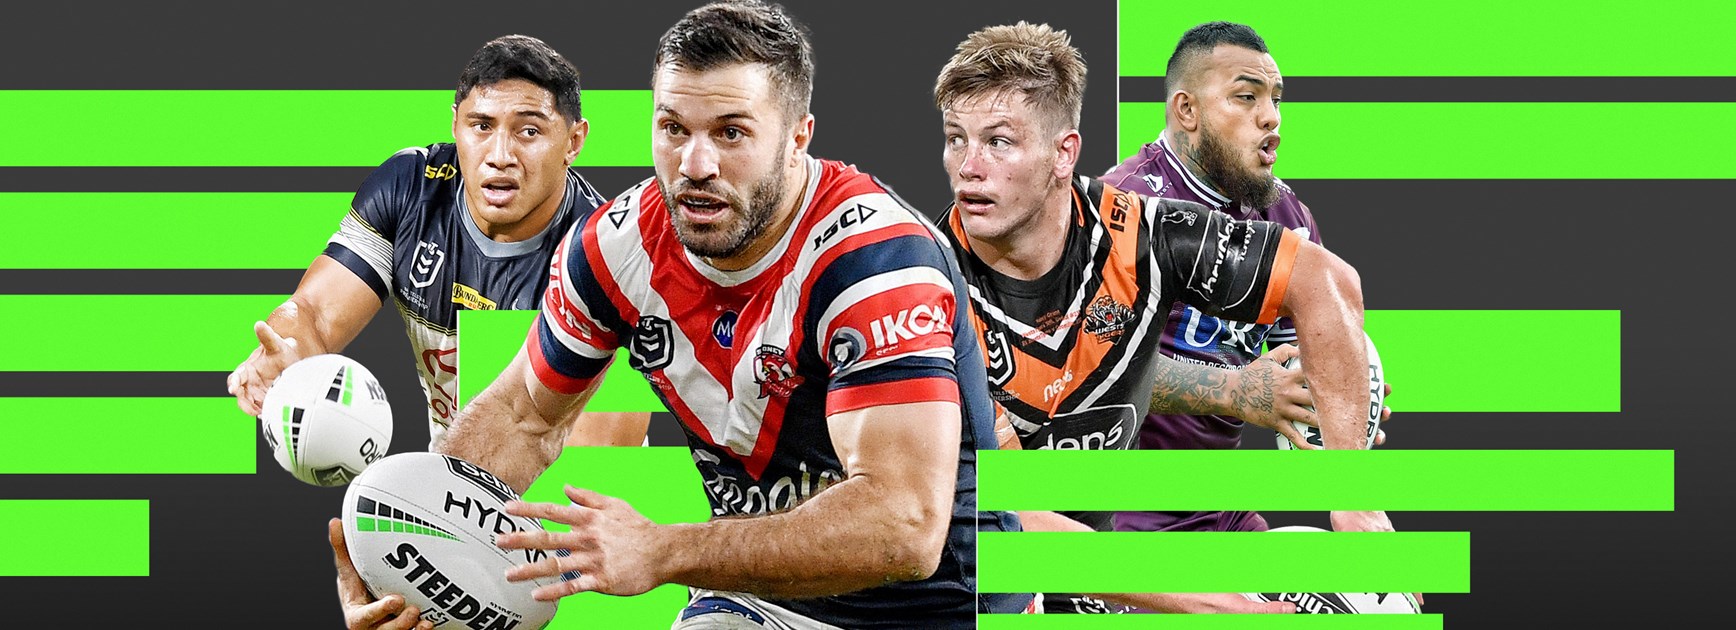 NRL Players' Poll: Part 1 - Best player, positions, coach, captain and more